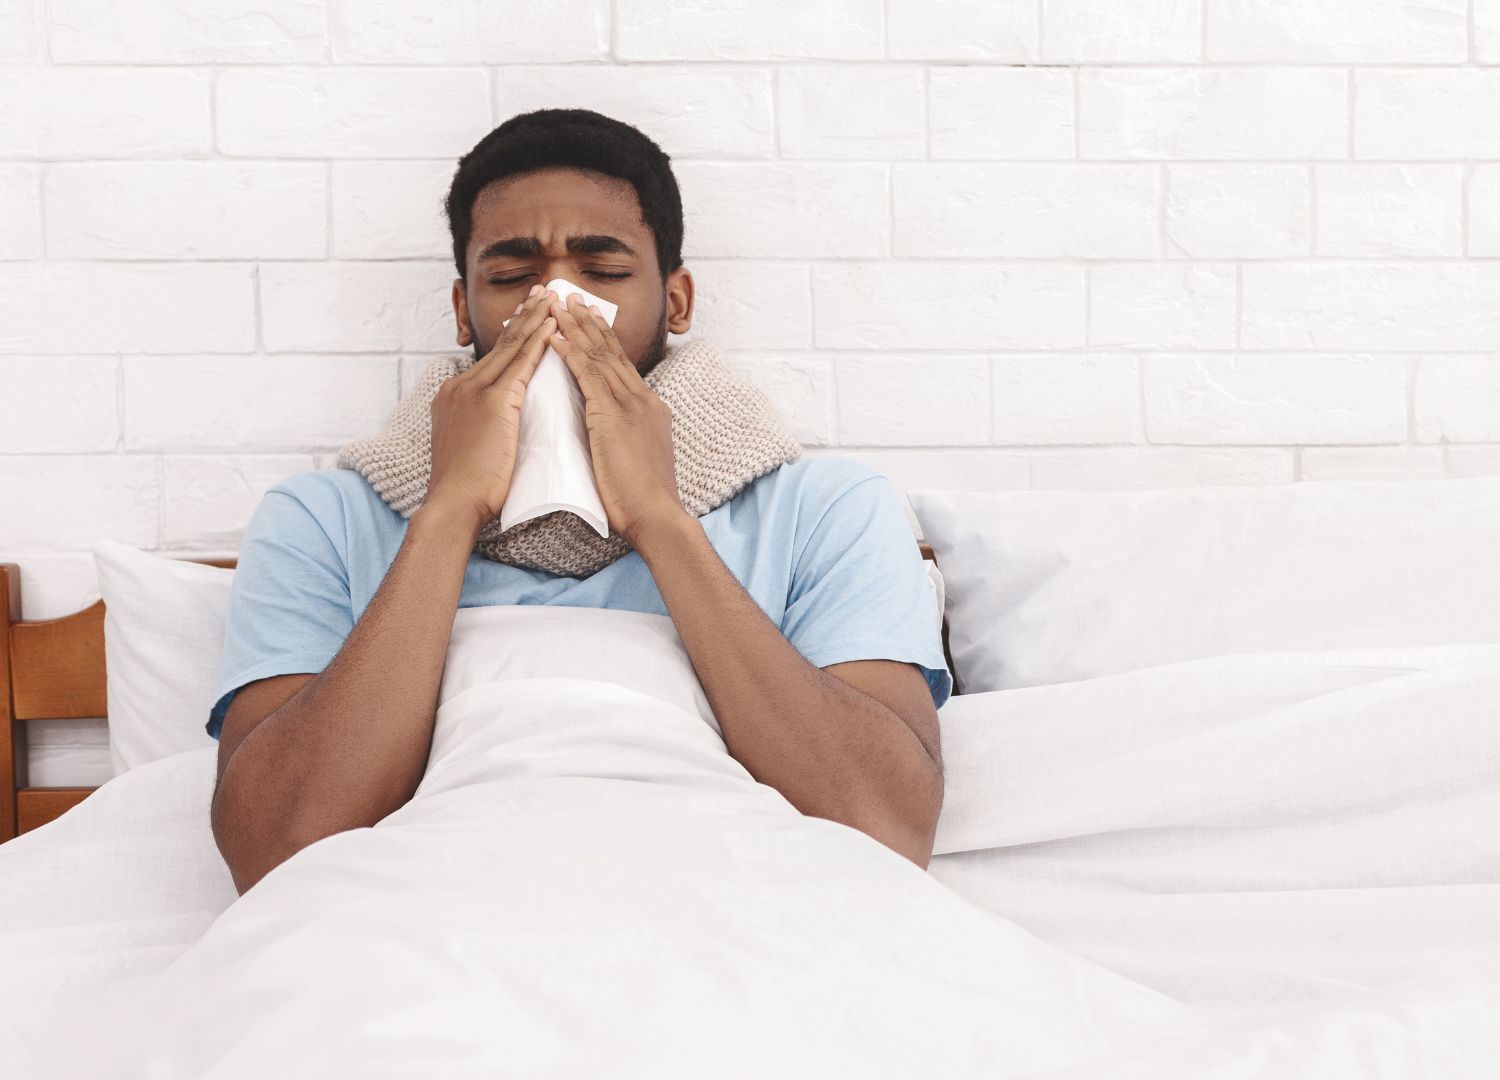 "Allergic rhinitis: A runny nose that  won't leave me alone (pidgin)"